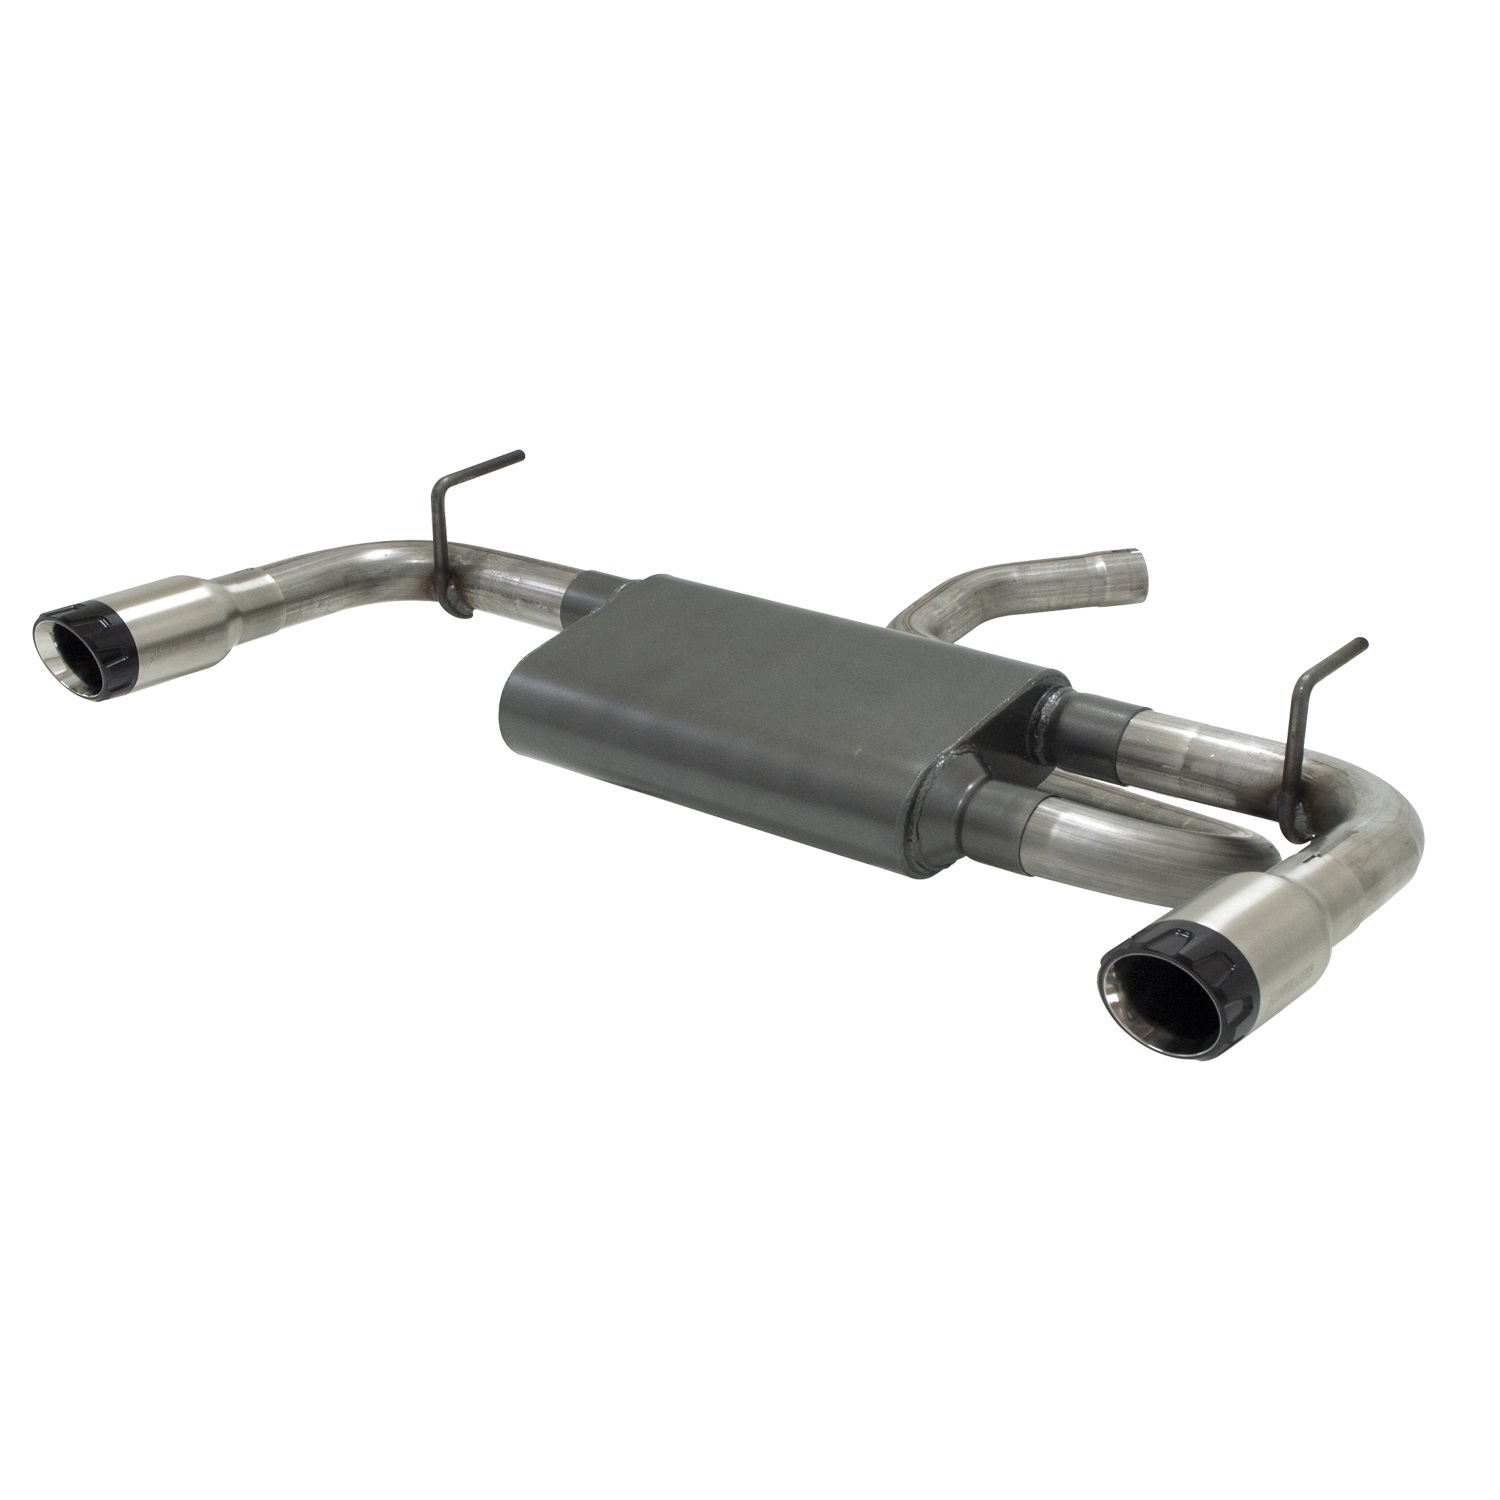 Flowmaster Flowmaster 817711 Force II Axle Back Exhaust System Fits 14 Cherokee (KL)